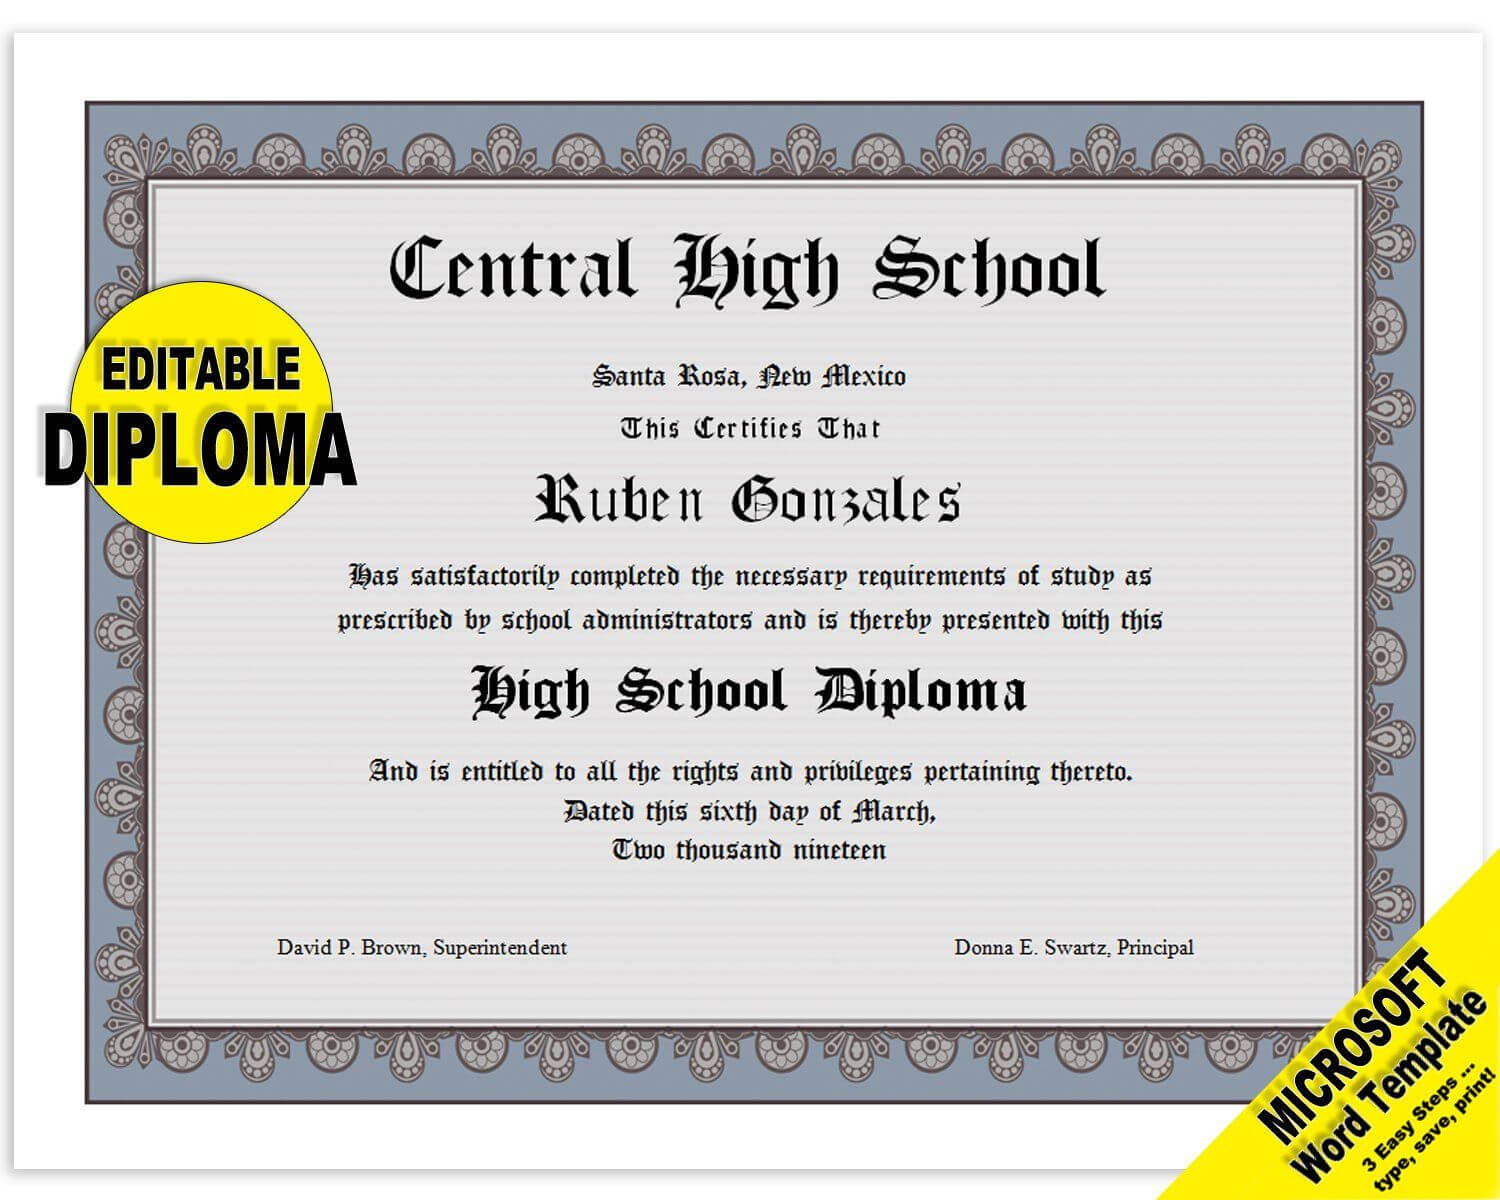 Diploma, Editable Word Template, Printable, Instant Download With Regard To Award Certificate Templates Word 2007